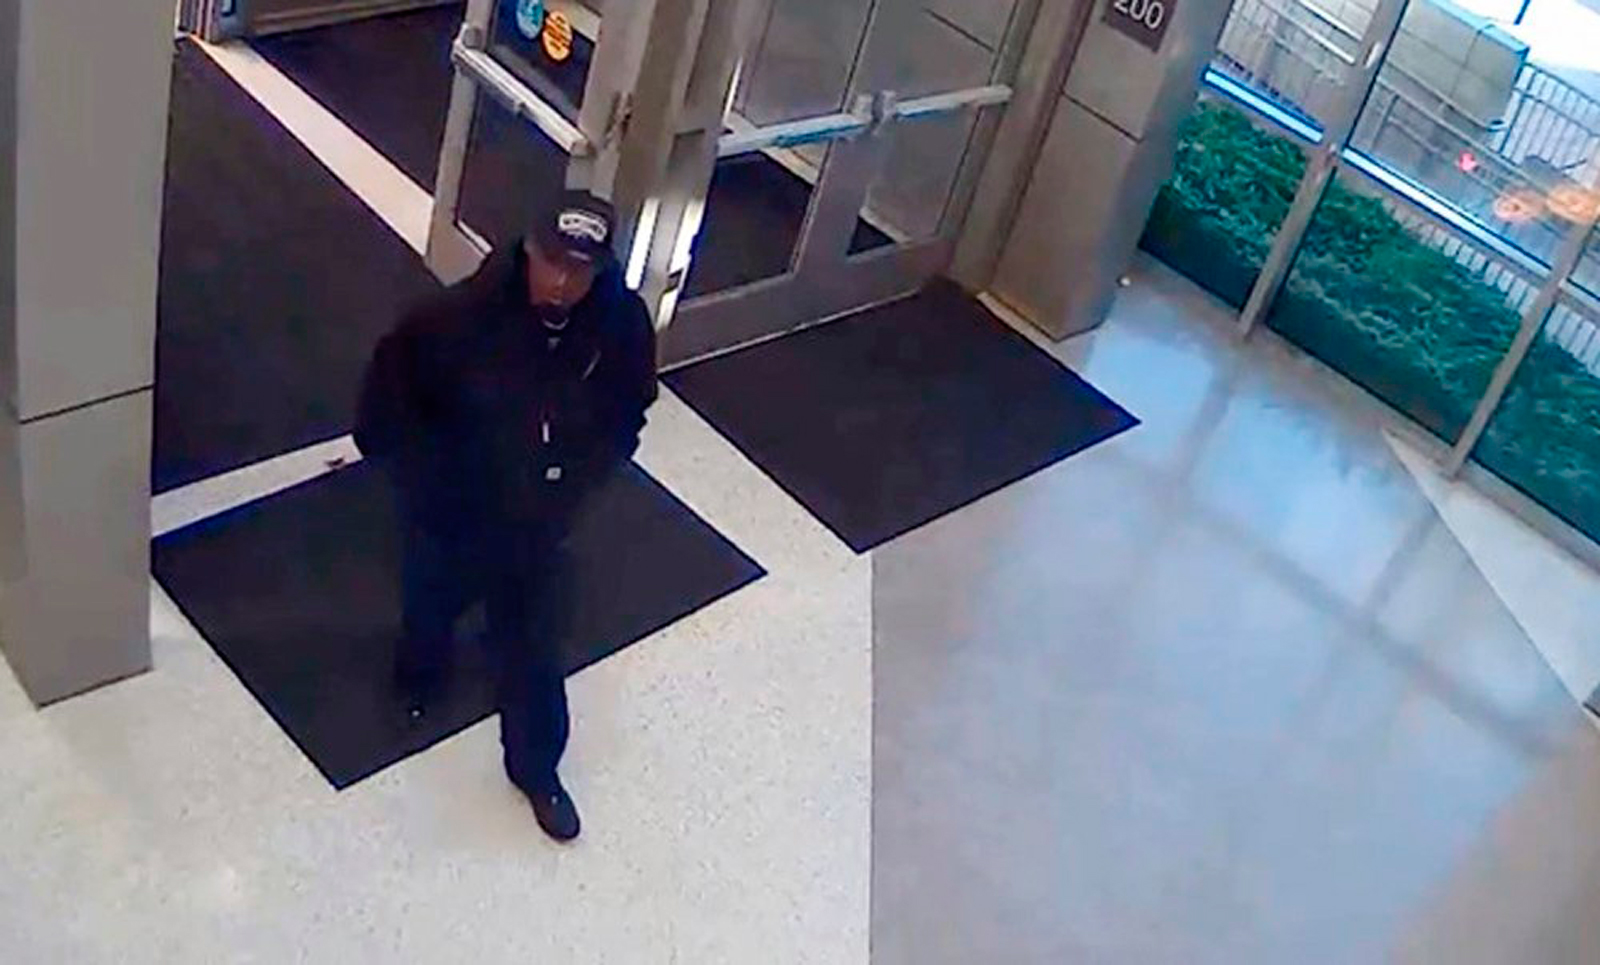 A man identified by the San Antonio Police Department as a suspect in the shooting death of police detective Benjamin Marconi, 50, is seen entering the police headquarters building in San Antonio, Texas, November 20, 2016, in a frame grab from video released by the police. San Antonio Police Department/Handout via REUTERS FOR EDITORIAL USE ONLY. NOT FOR SALE FOR MARKETING OR ADVERTISING CAMPAIGNS